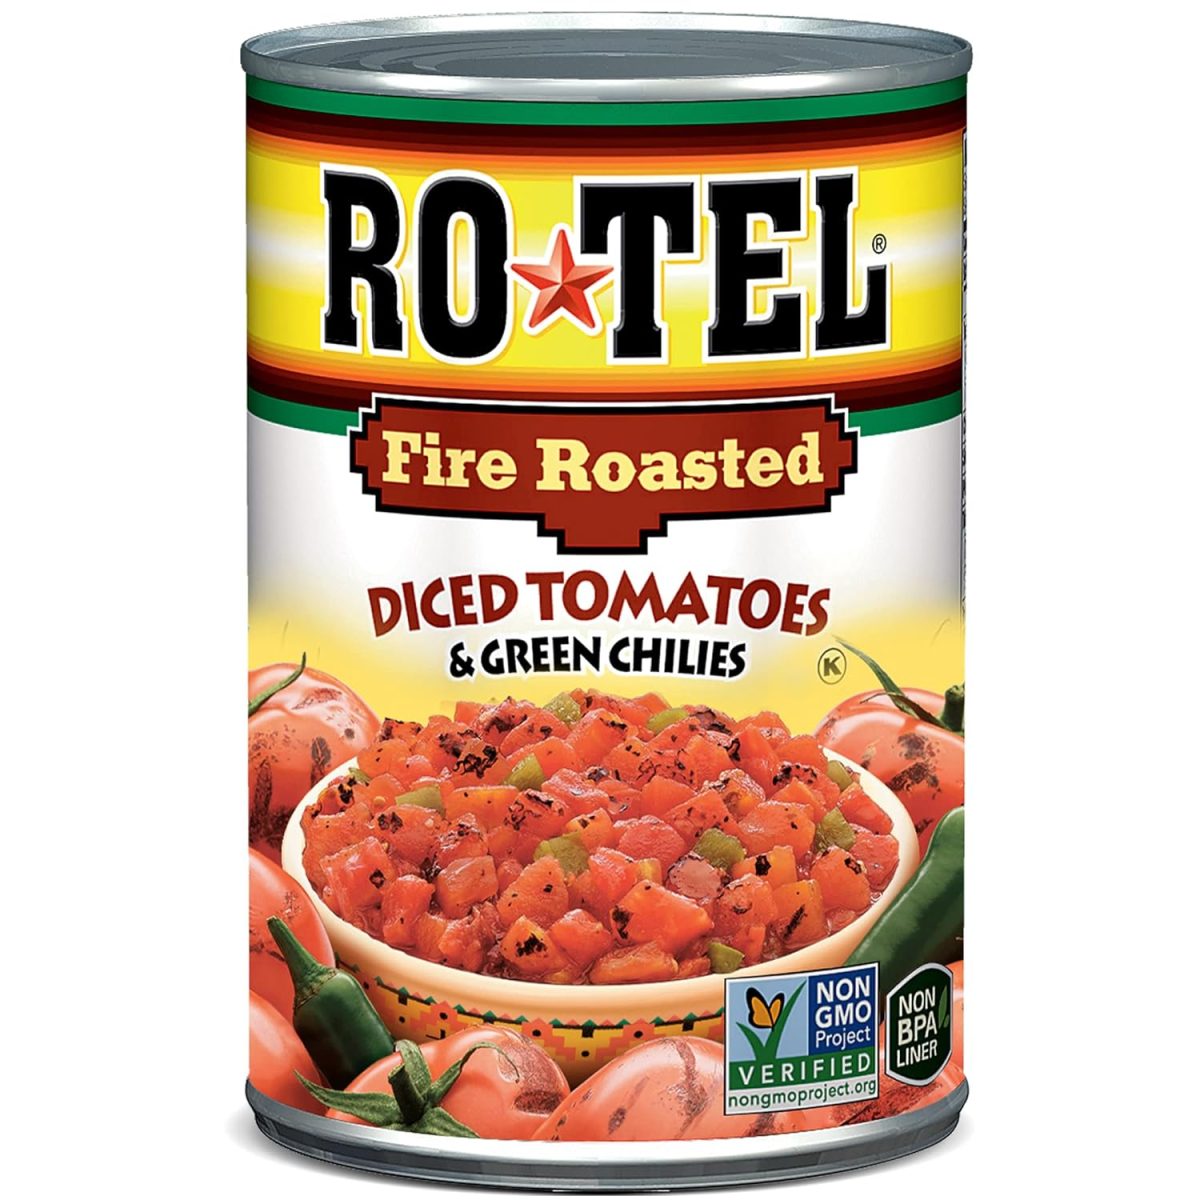 ROTEL Fire Roasted Diced Tomatoes and Green Chilies